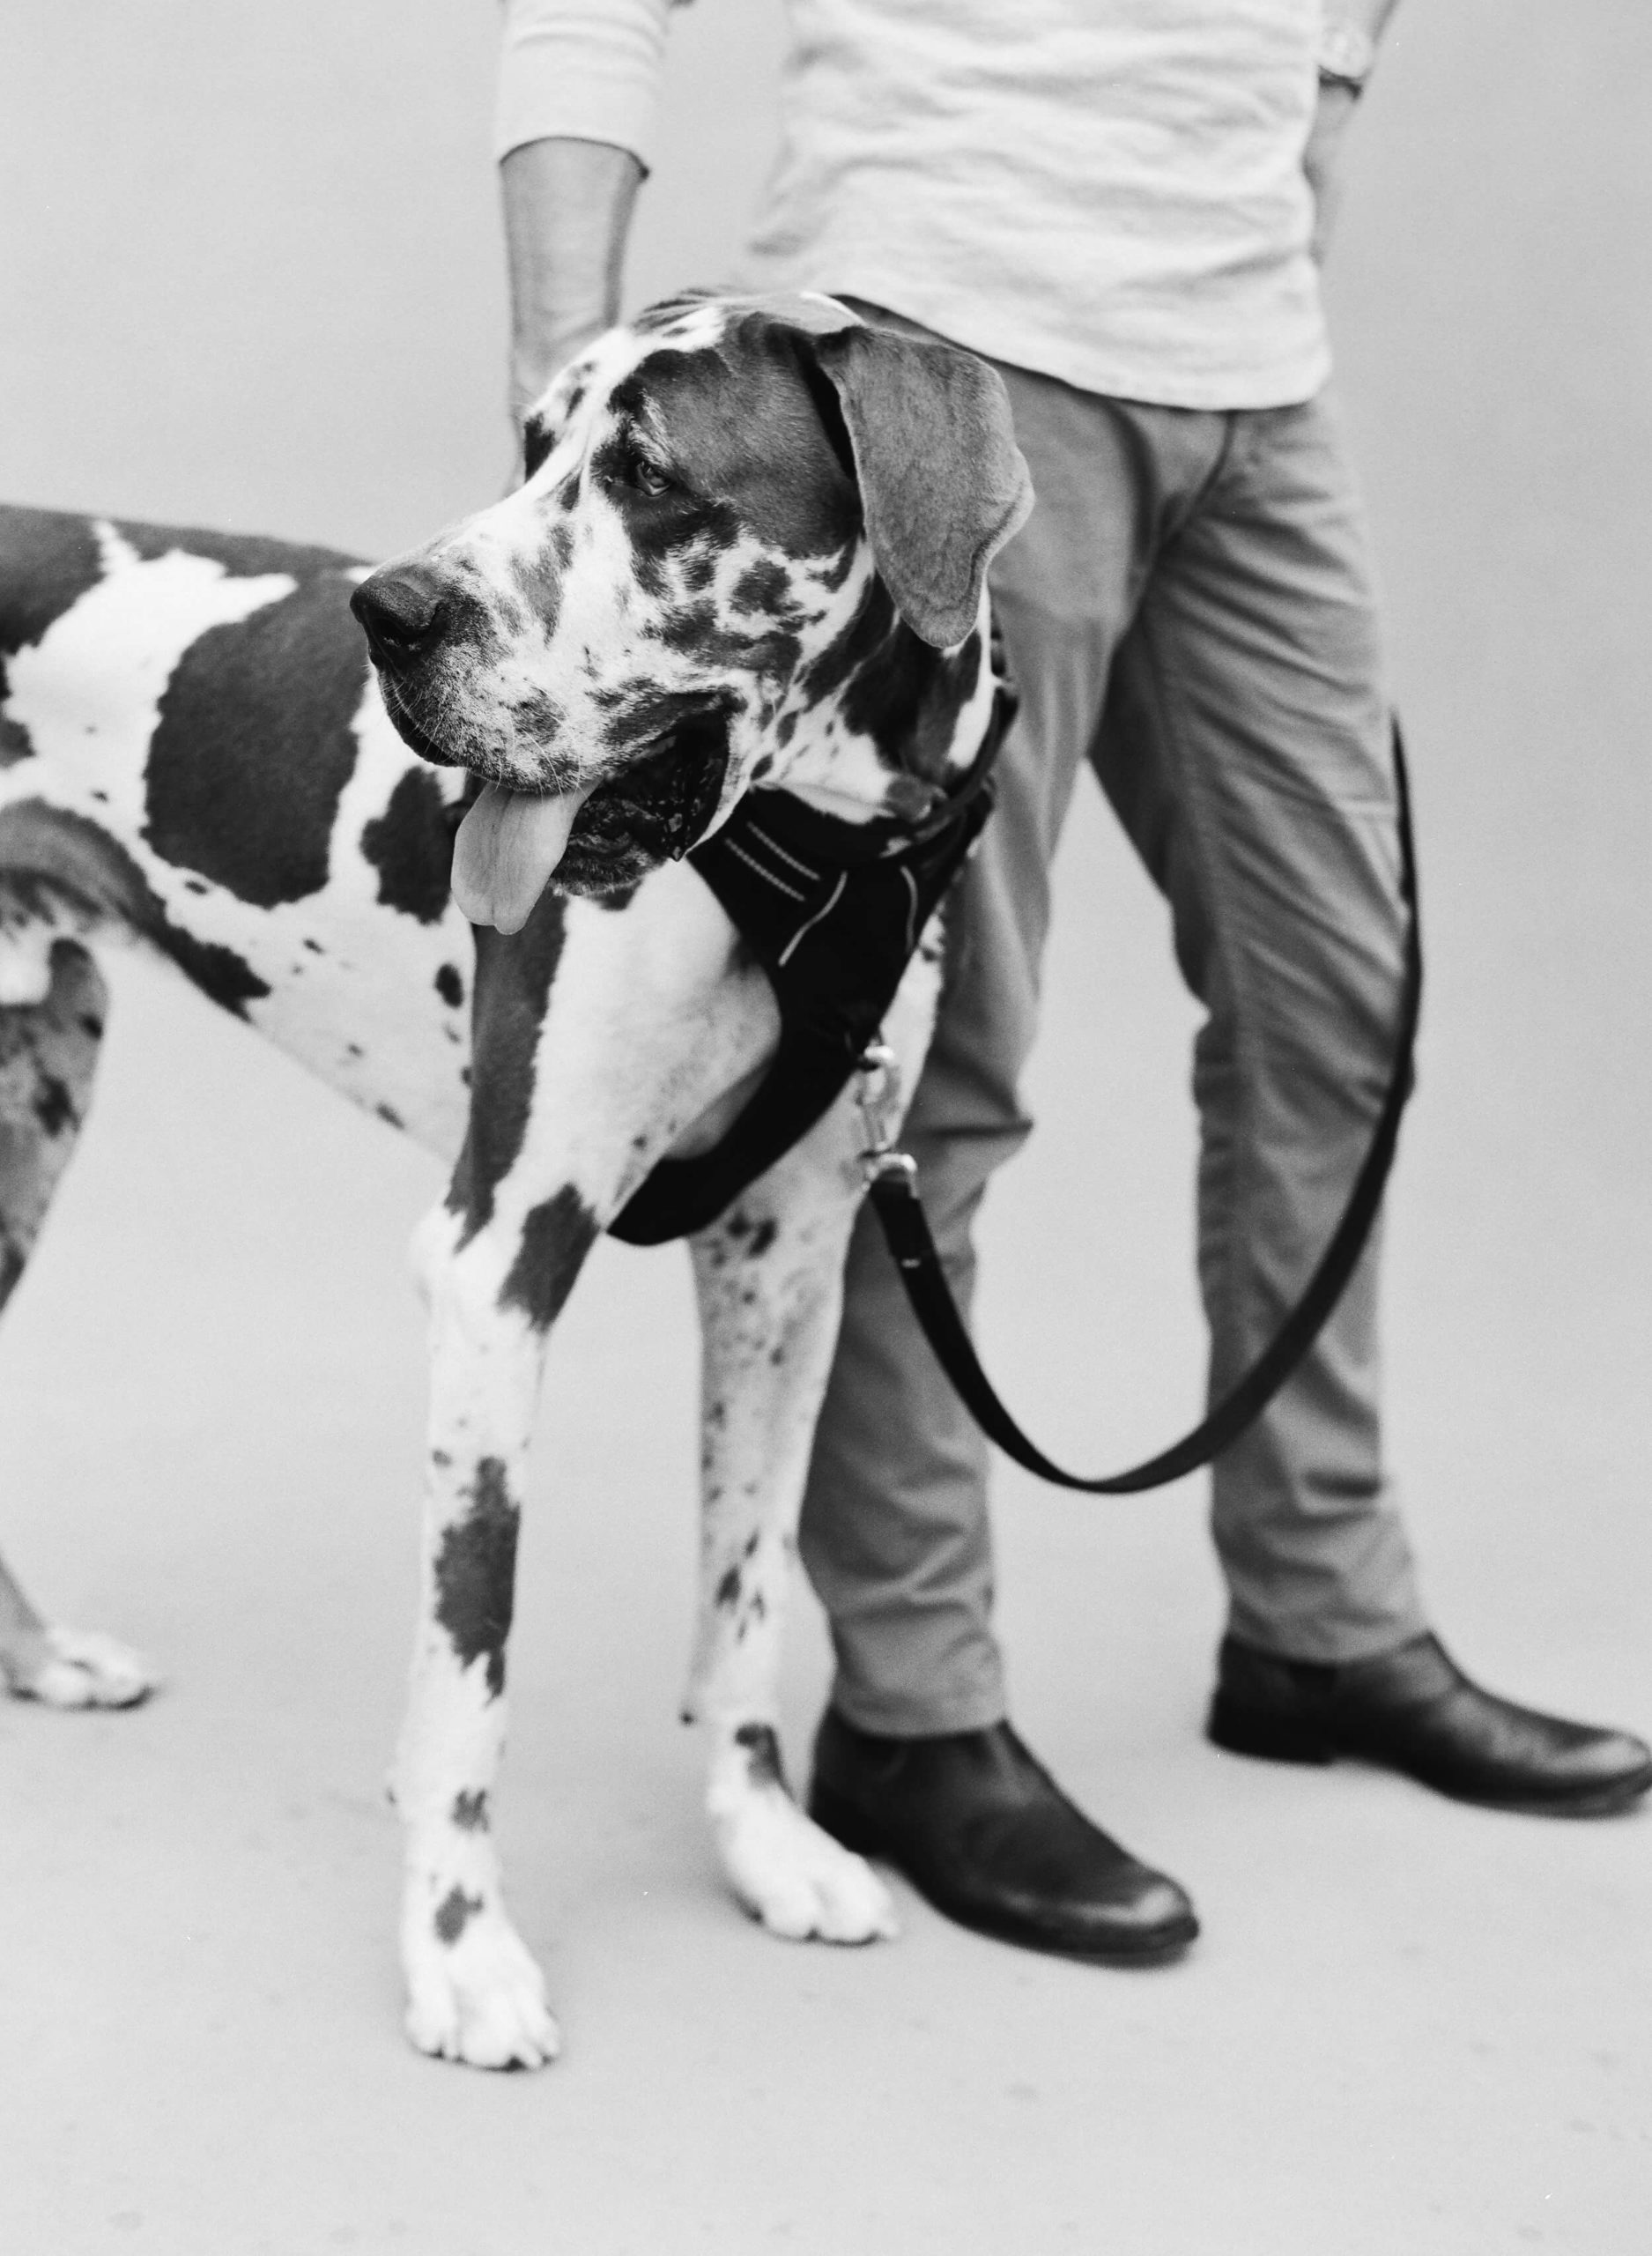 KT Merry shares why fostering animals, like this Great Dane, is such a big part of her life and how you can make time to give back to the causes that matter to you.